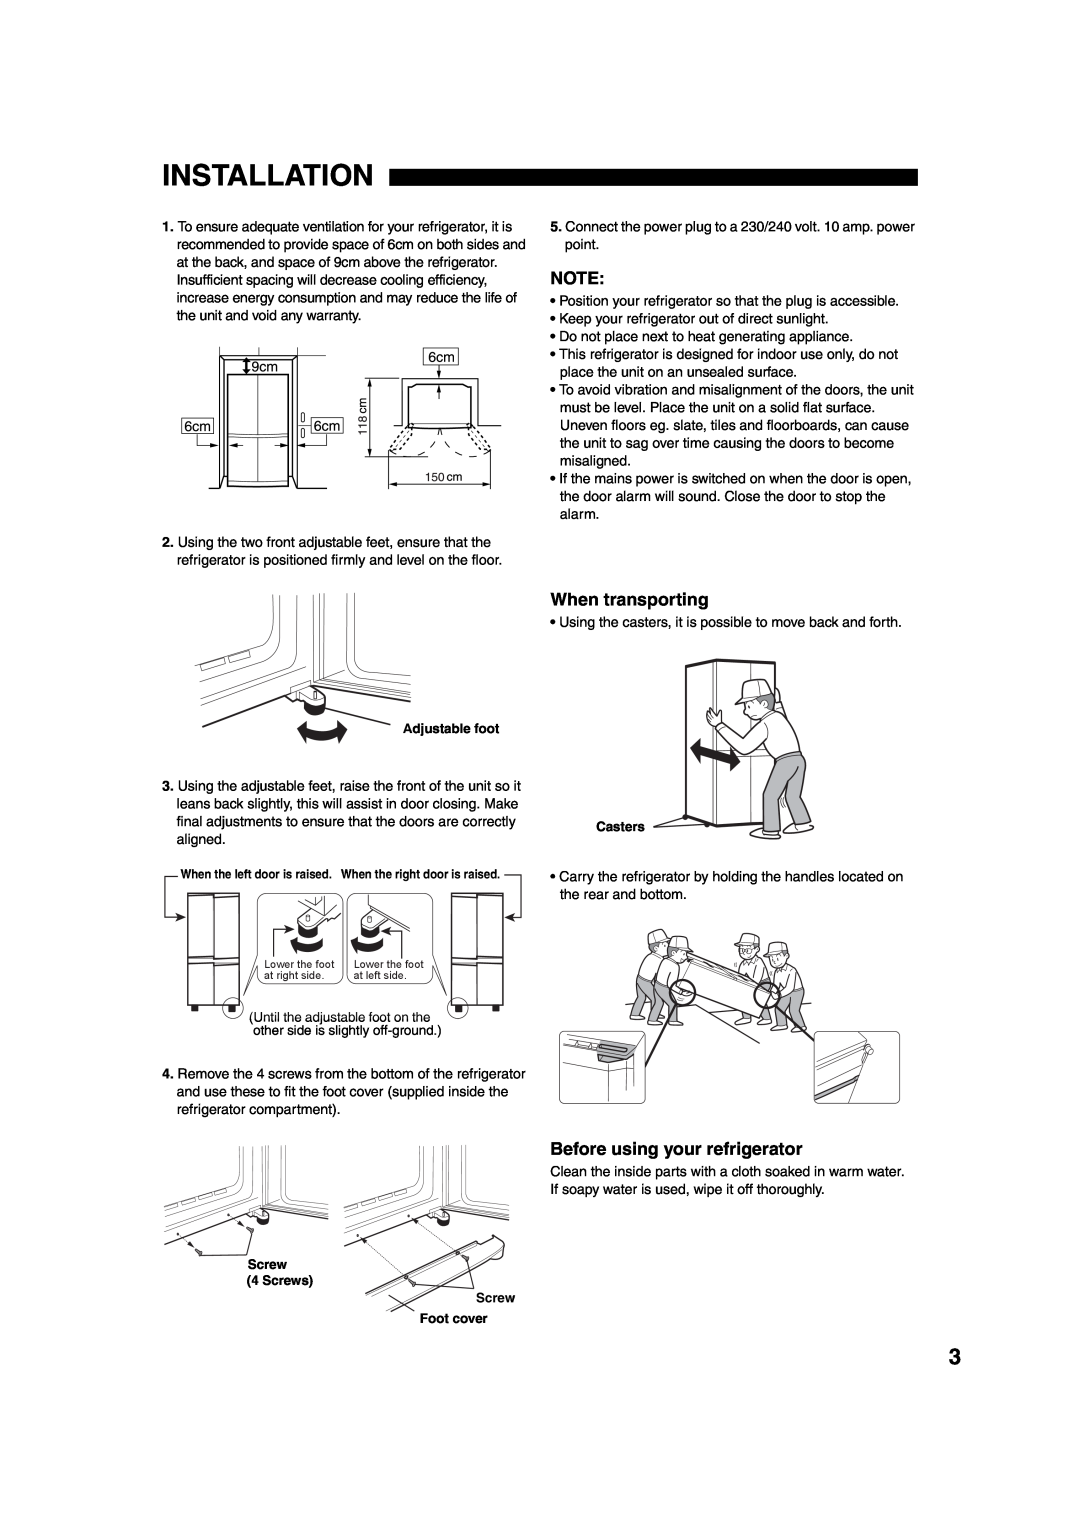 Sharp SJ-F65PC, SJ-F65PS, SJ-F60PC, SJ-F60PS operation manual Installation, When transporting, Before using your refrigerator 